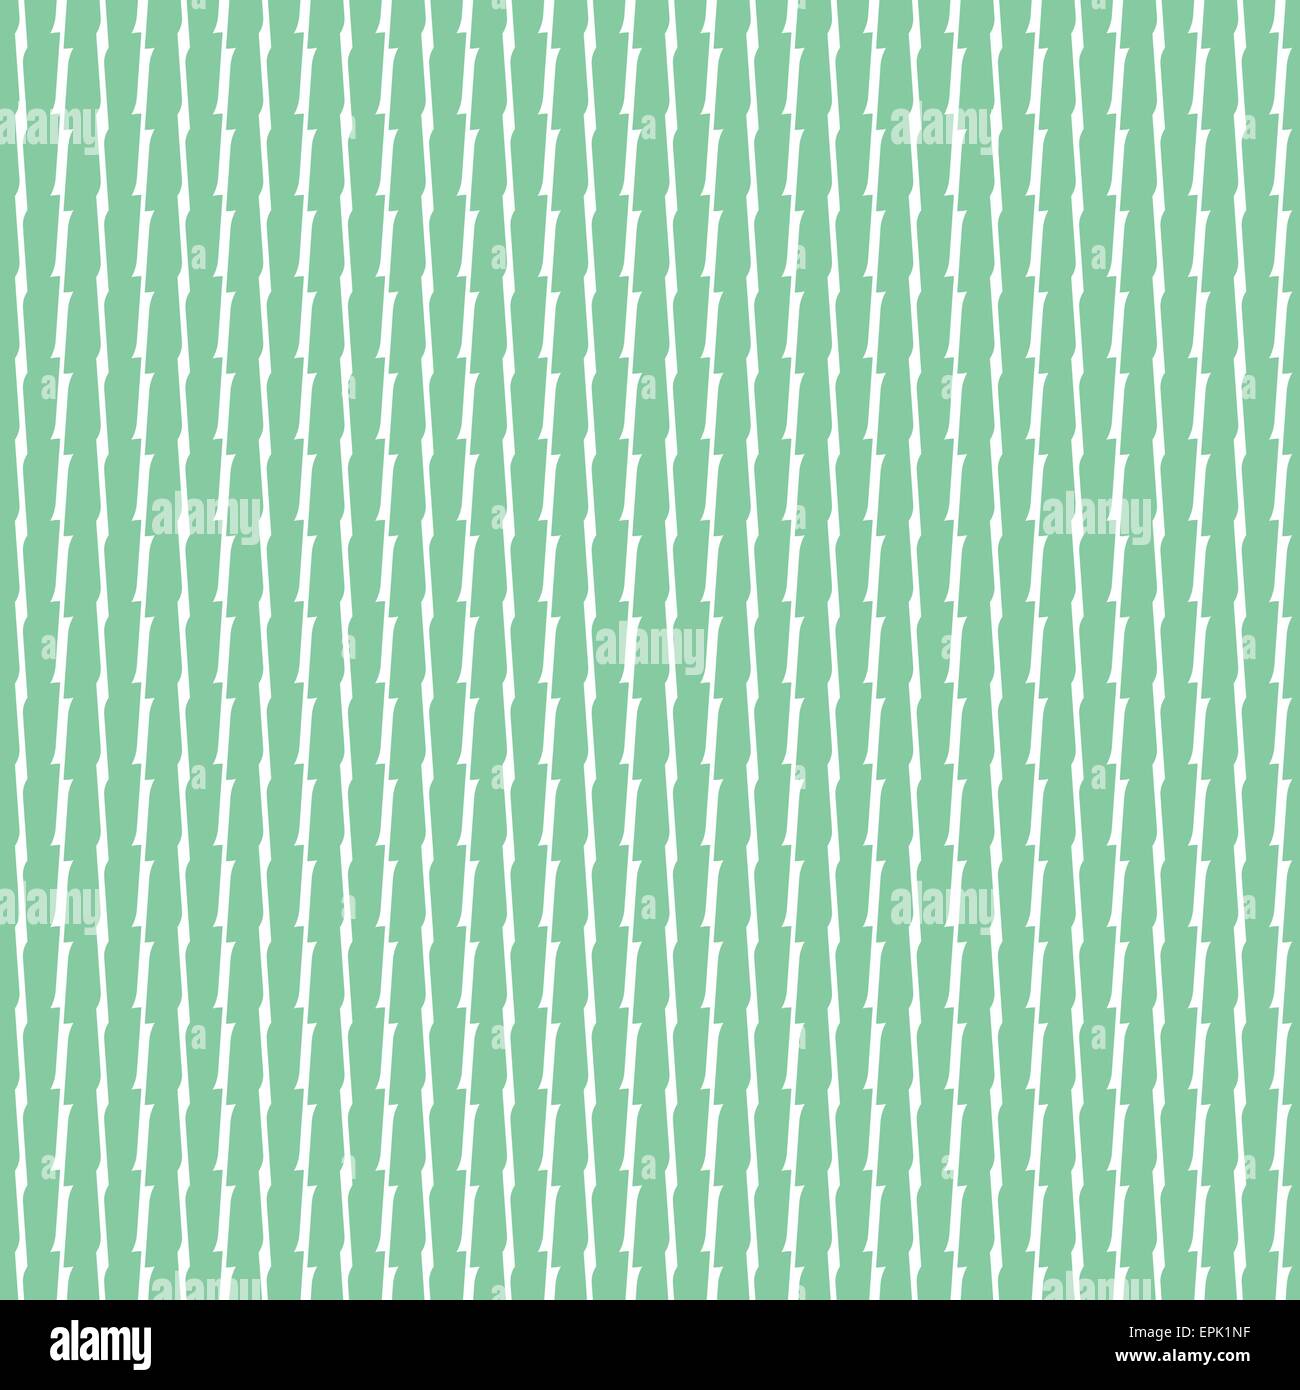 new seamless pattern with simple vertical, green stripes. vector classic background design Stock Vector